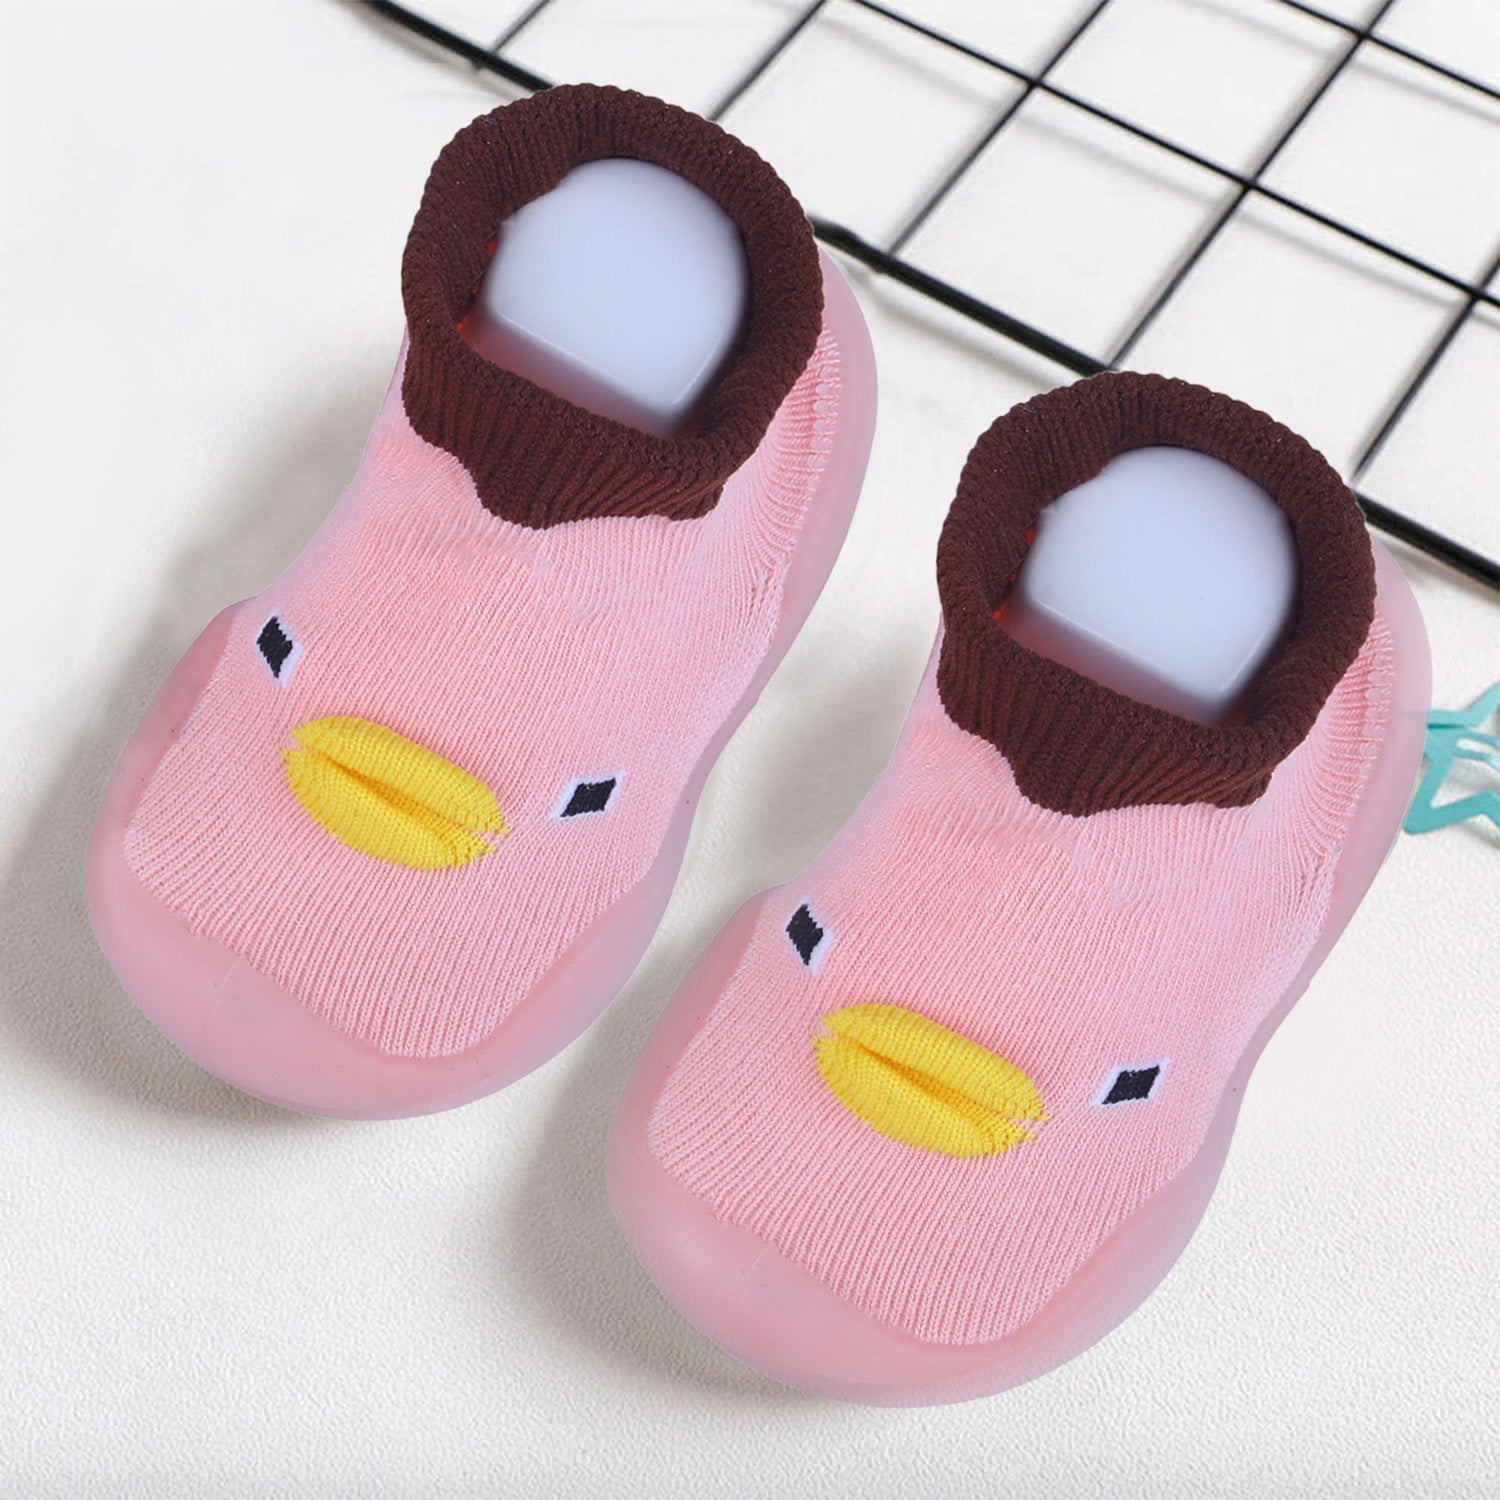 Baby Moo Cute Duck Face Rubber Comfortable Sole Slip-On Sock Shoes - Pink - Baby Moo